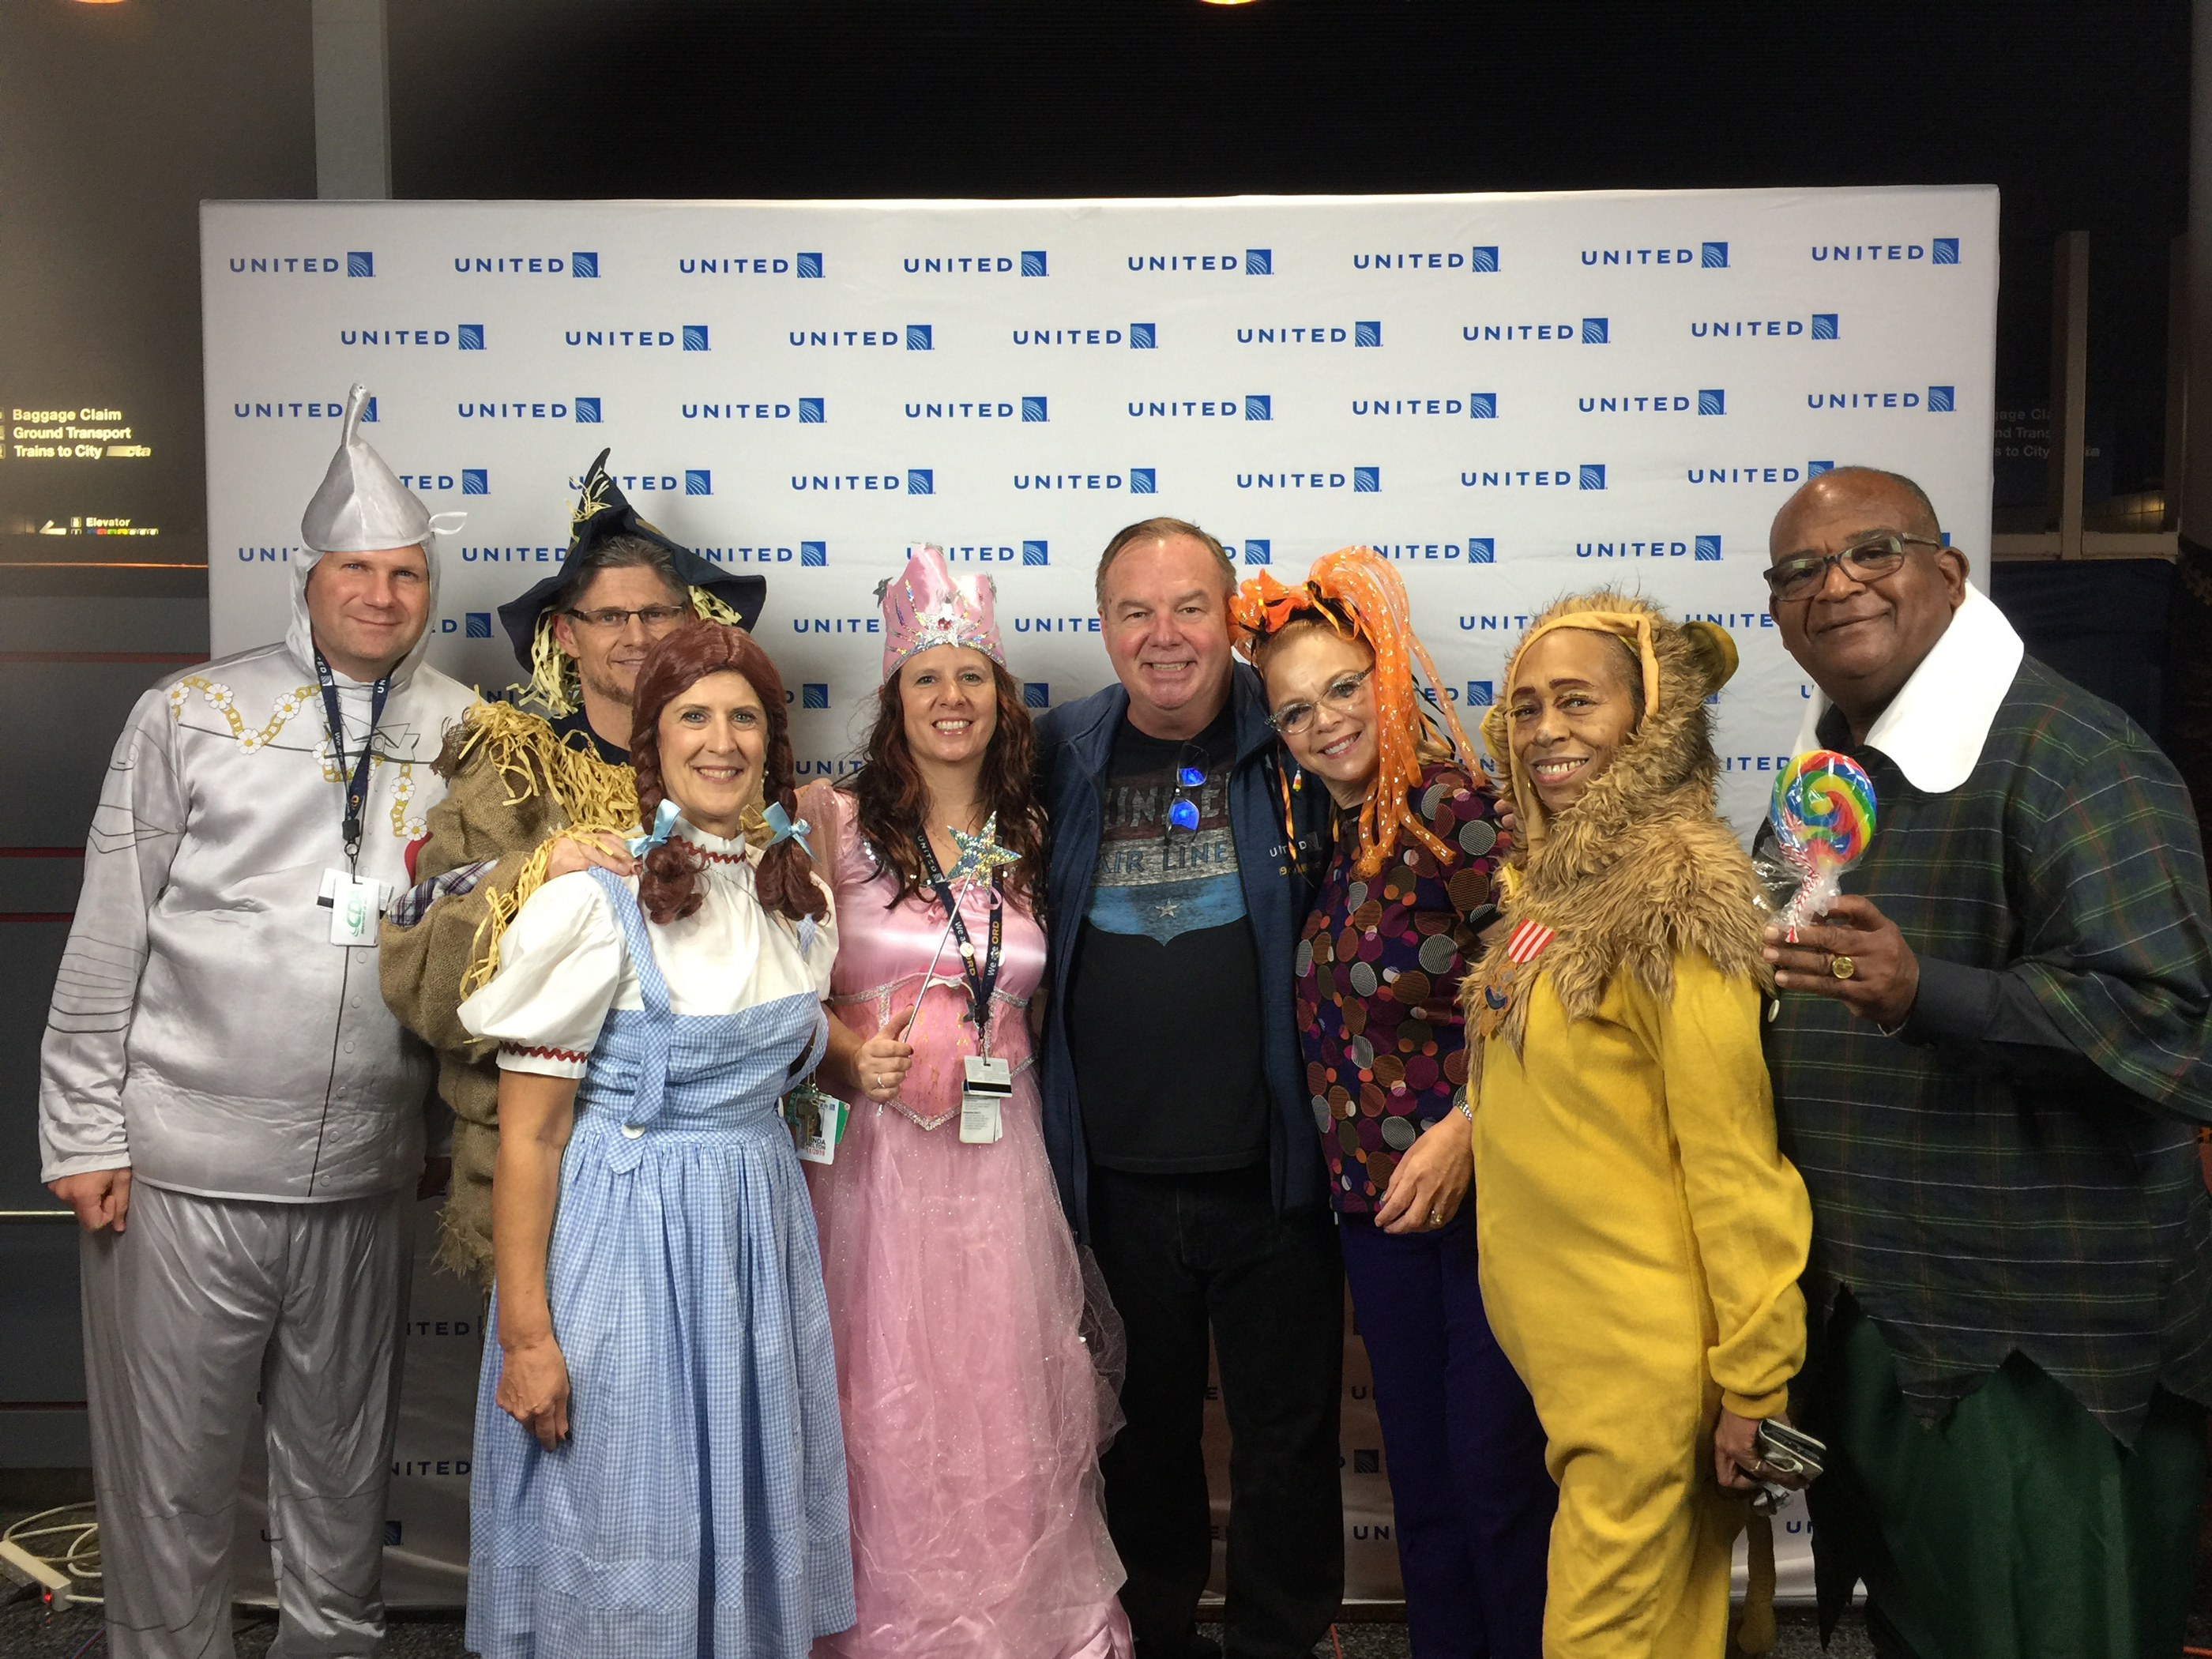 Tom Stuker with United employees at ORD that dressed up for Halloween in 2018.